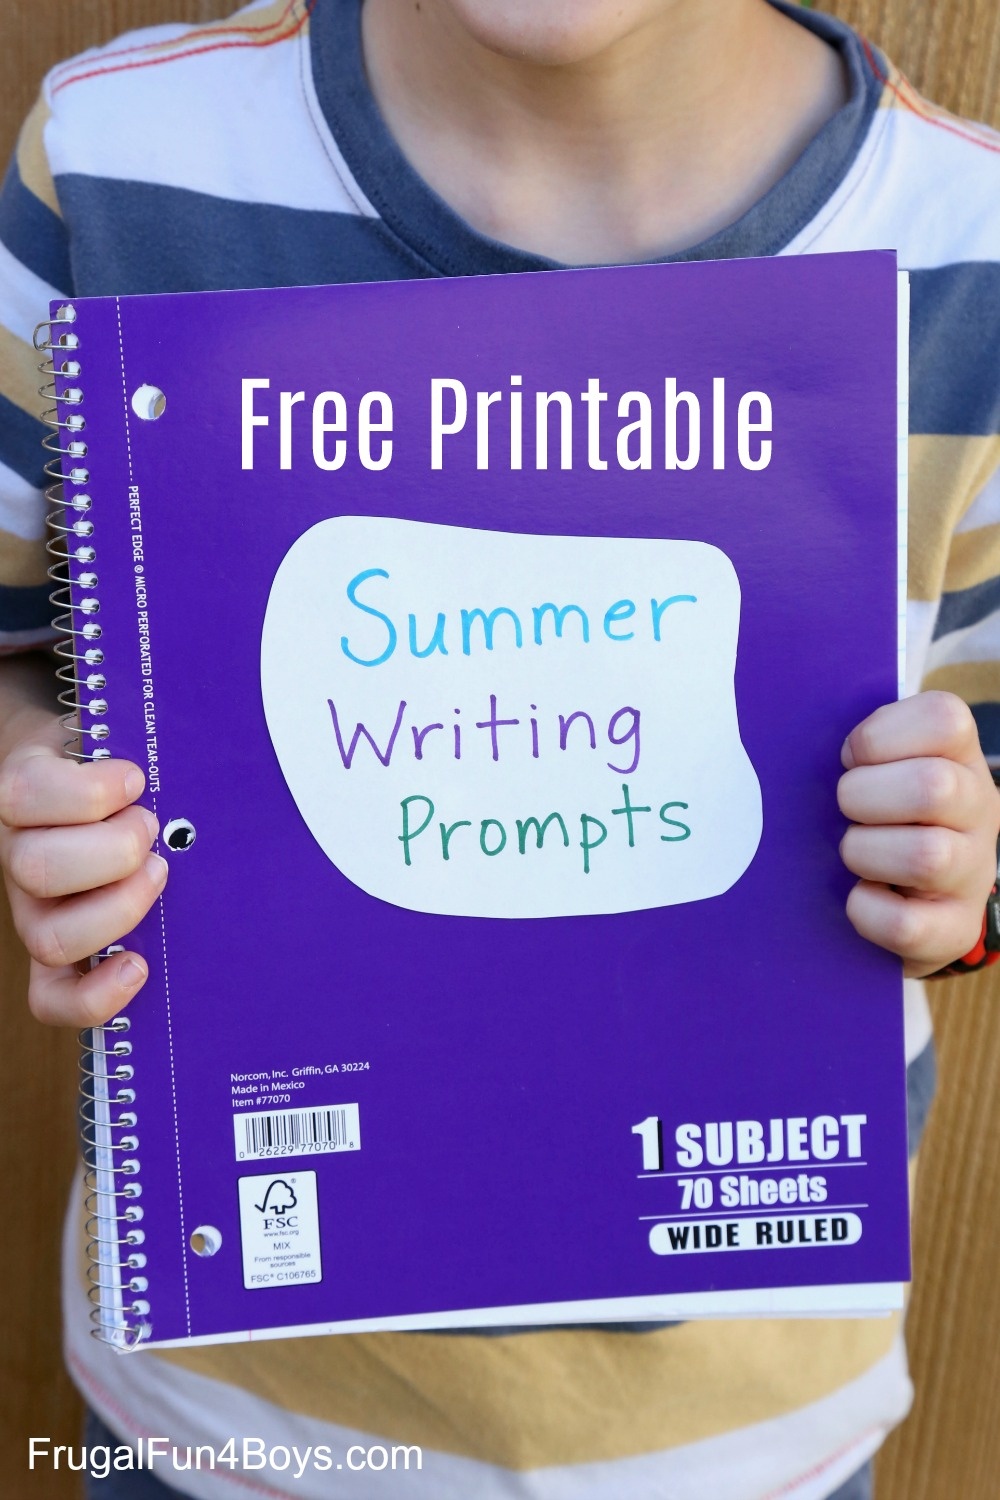 40 Printable Writing Prompts For 3Rd, 4Th, And 5Th Graders - Frugal - Free Printable Stories For 4Th Graders